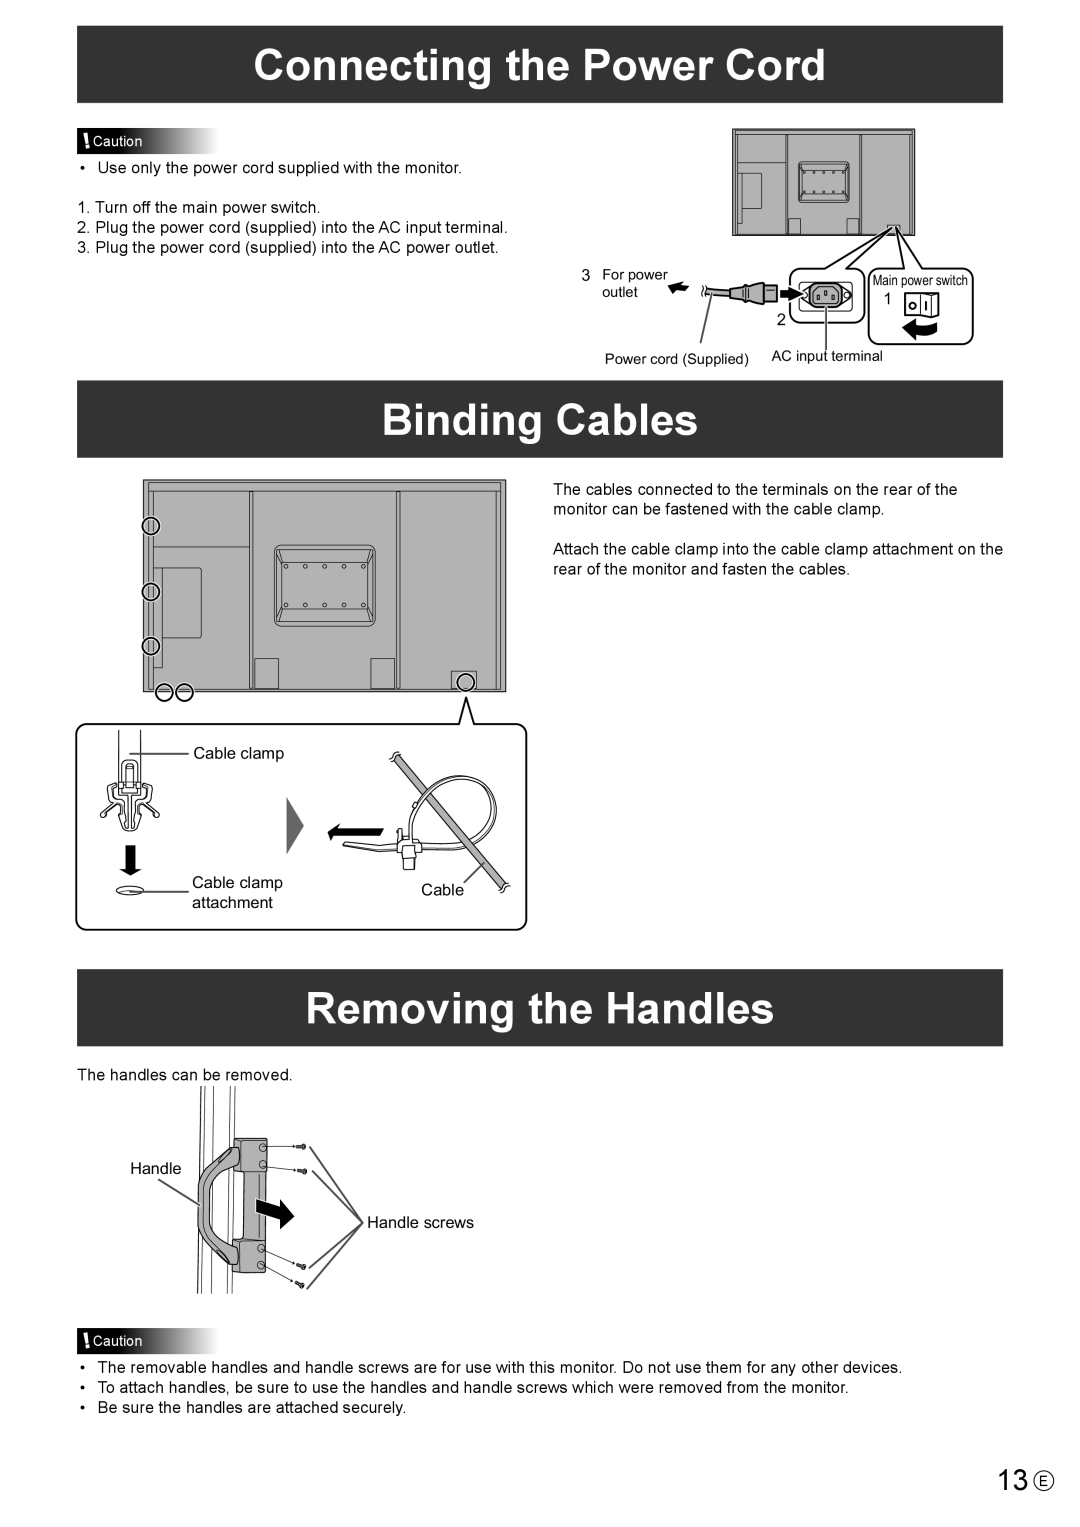 Sharp PNE802, PN-E802 operation manual Connecting the Power Cord, Binding Cables, Removing the Handles, 13 E 